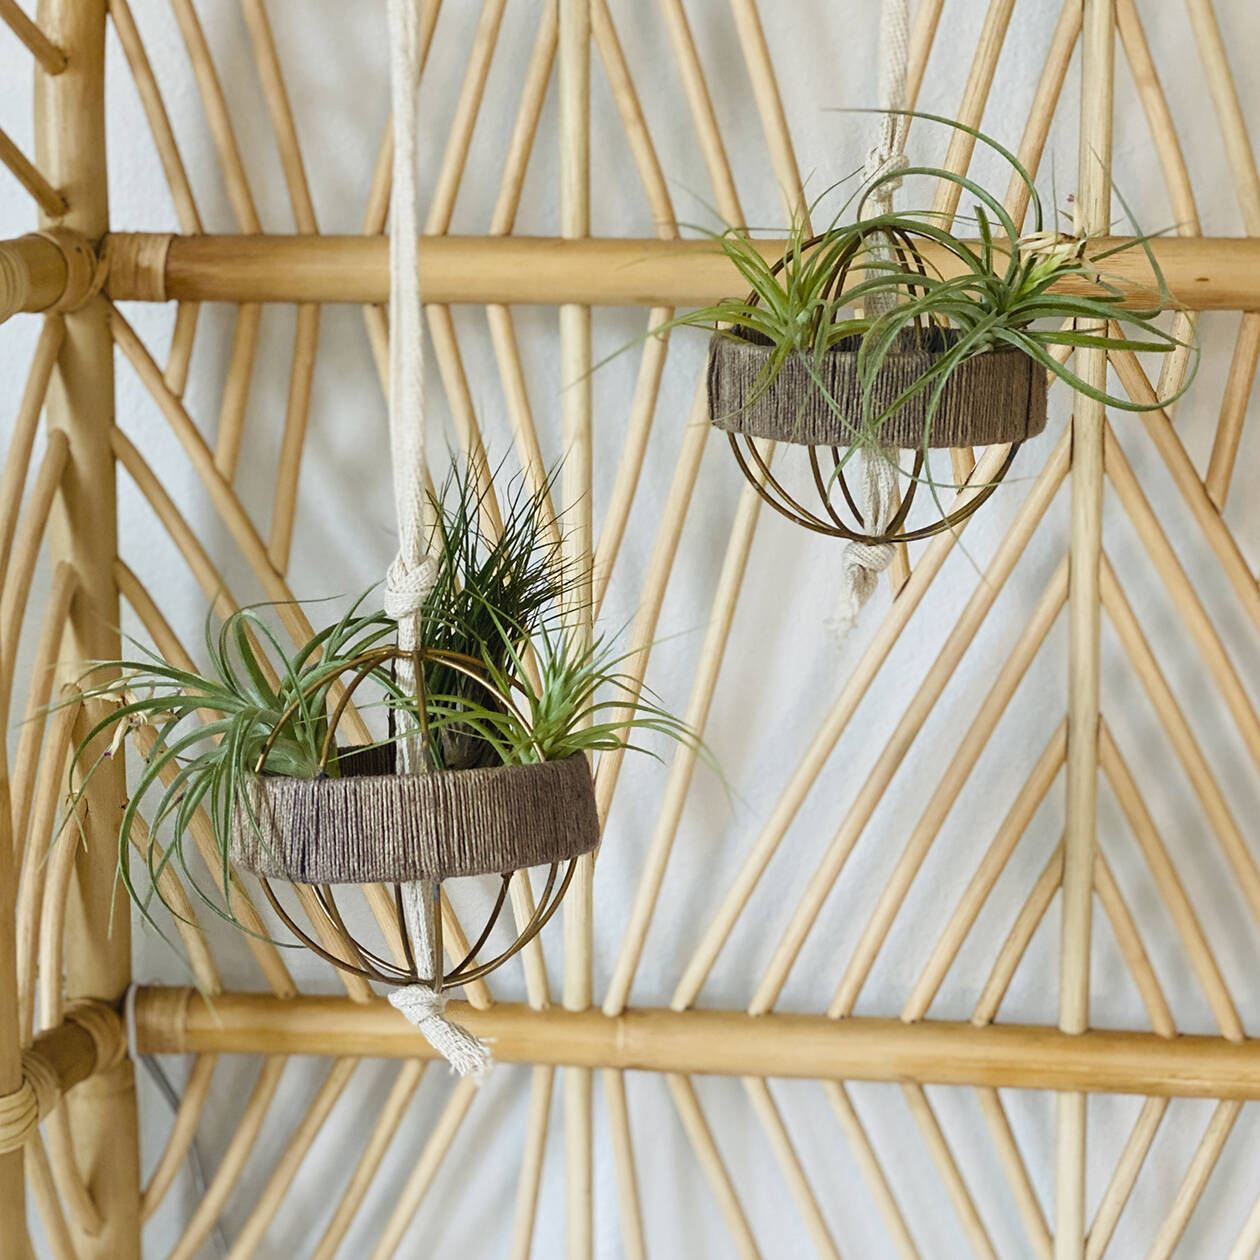 Two home decor balls turned into hanging plant holders.